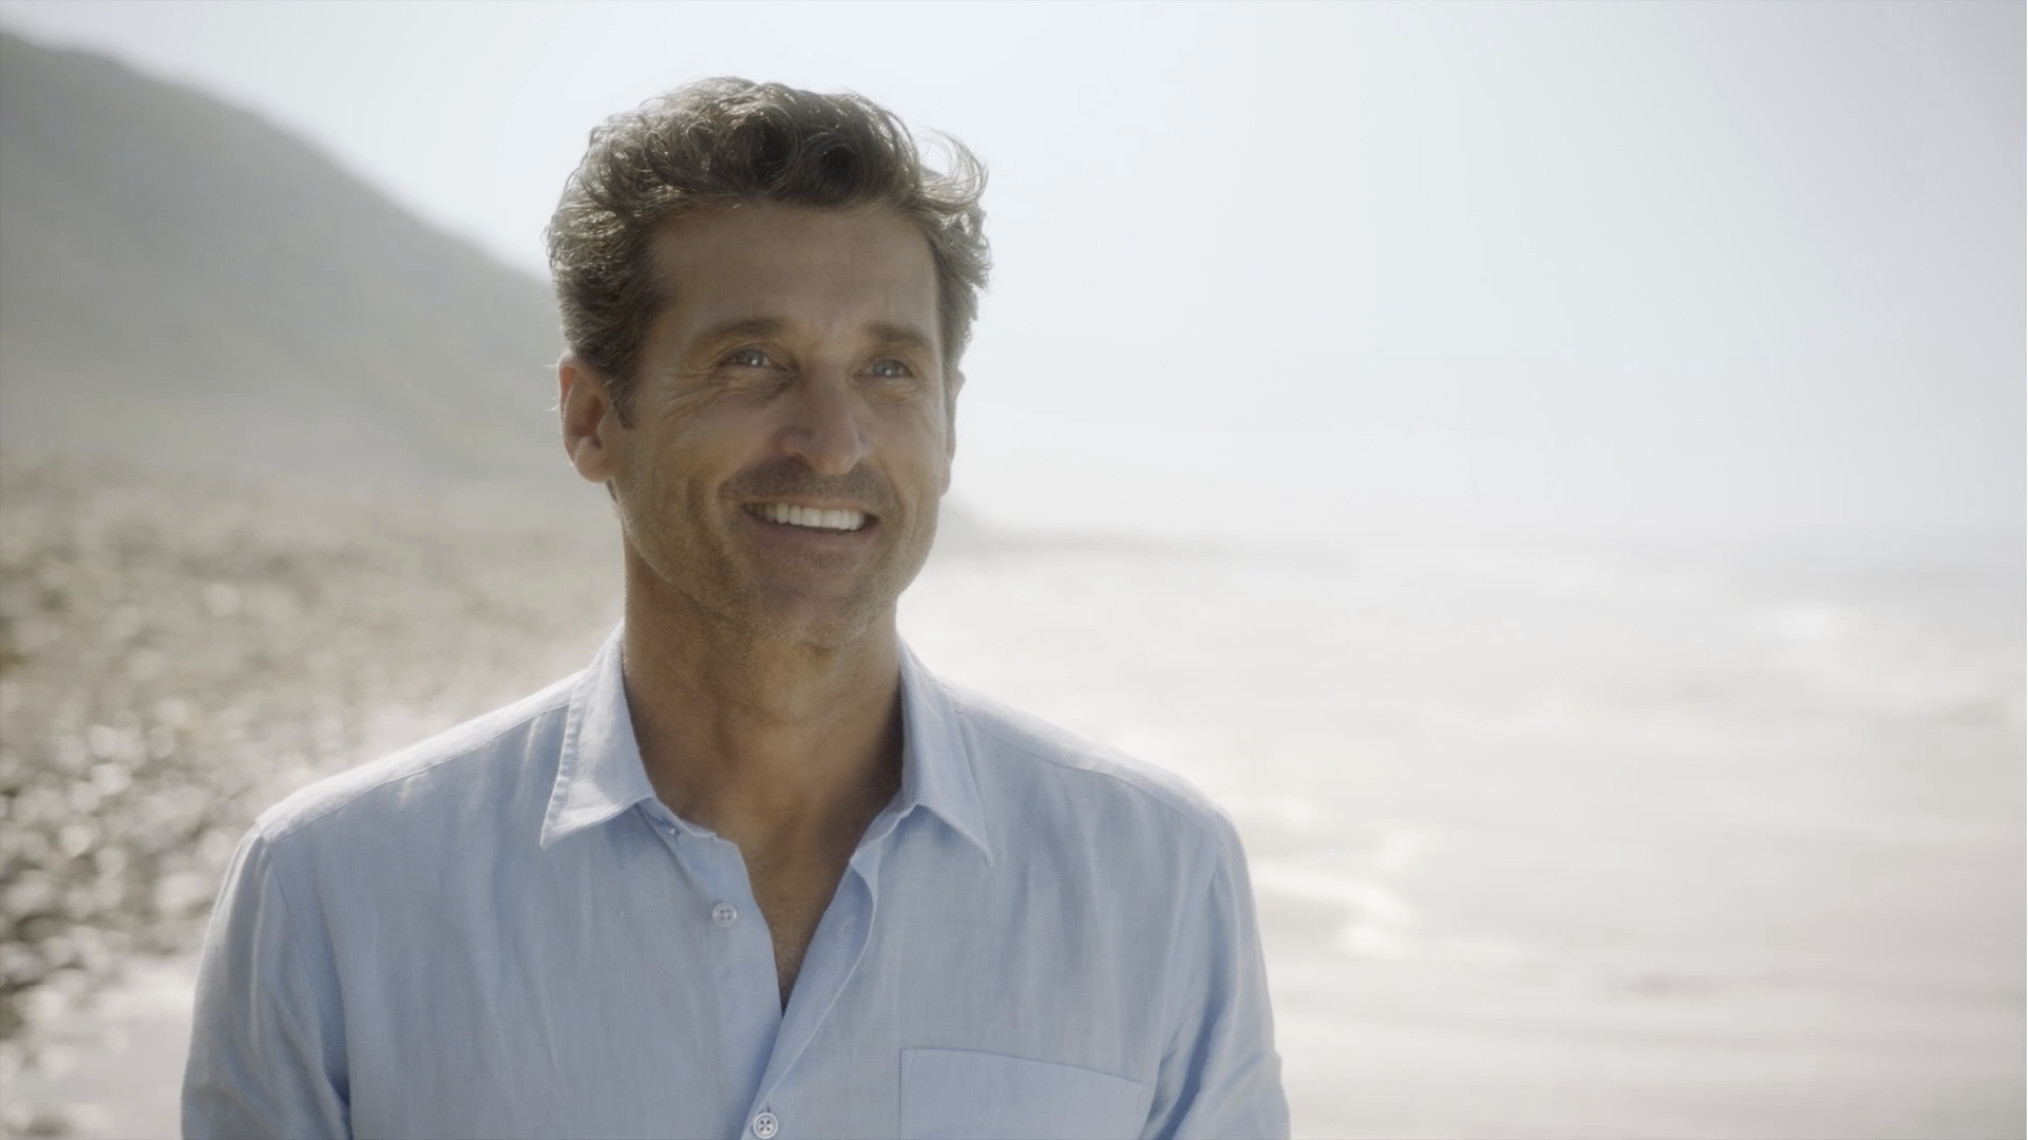 How the Show Got Patrick Dempsey to Return